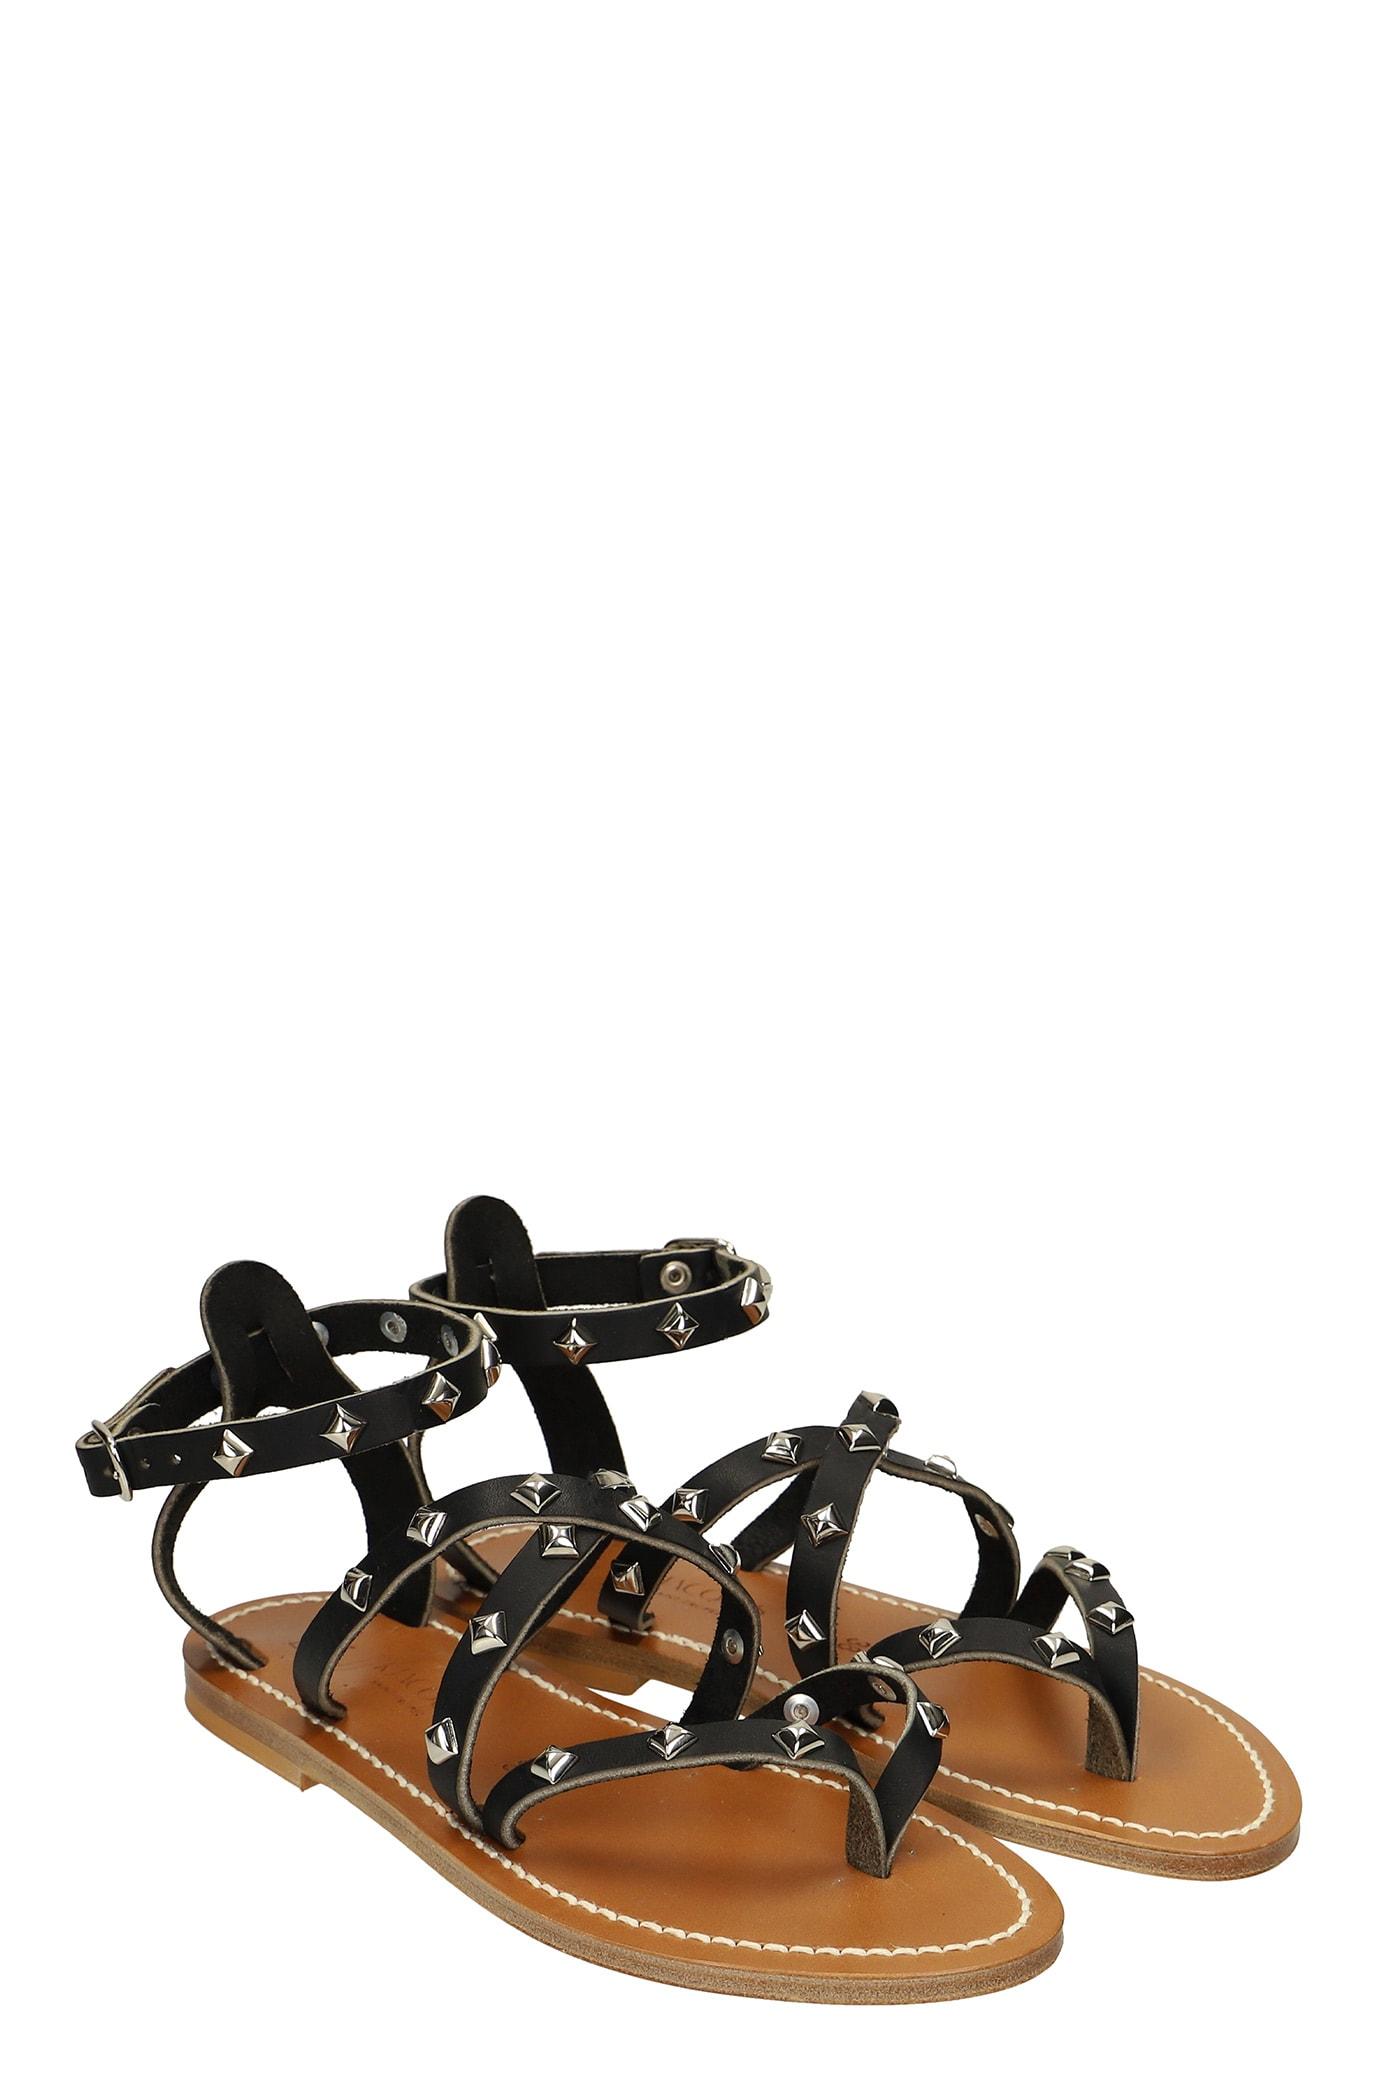 K. Jacques Epicurepyr Flats In Leather in Black | Lyst